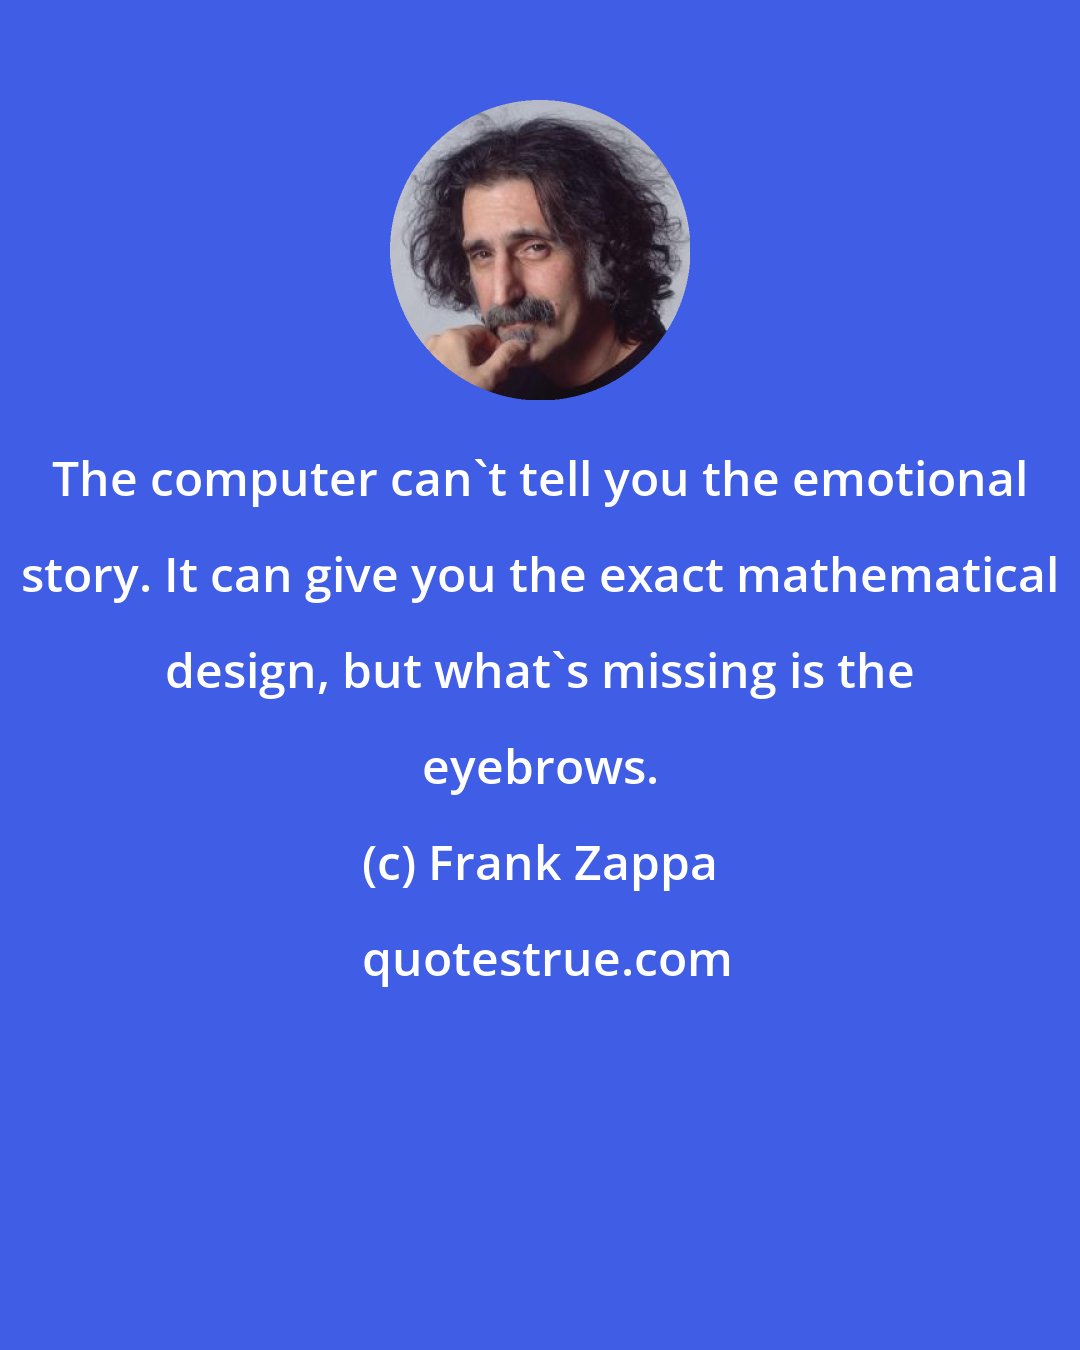 Frank Zappa: The computer can't tell you the emotional story. It can give you the exact mathematical design, but what's missing is the eyebrows.